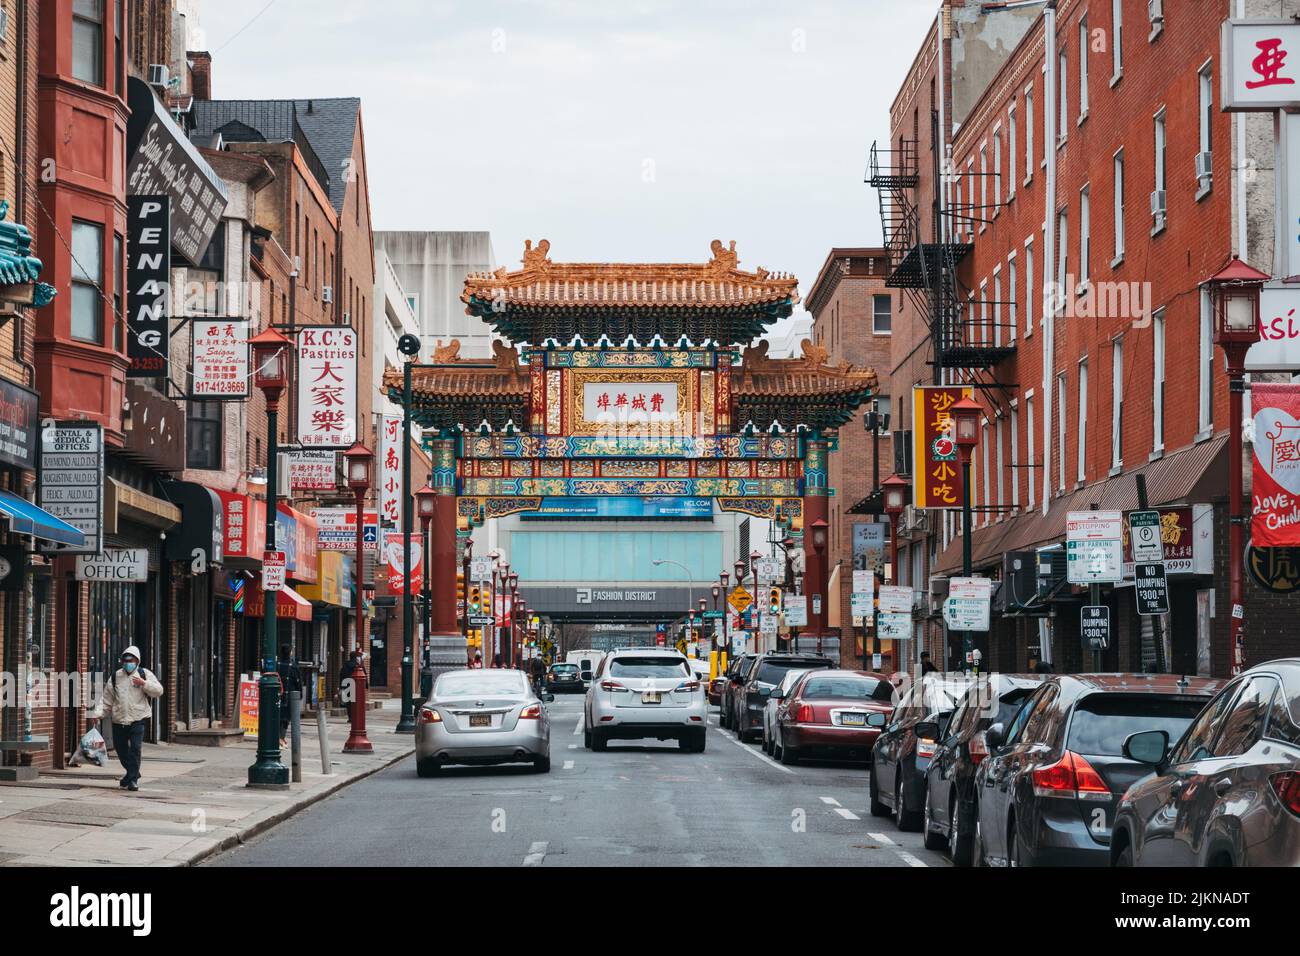 Looking down a street filled with restaurants, shops and other Chinese businesses in Chinatown, Philadelphia, USA Stock Photo